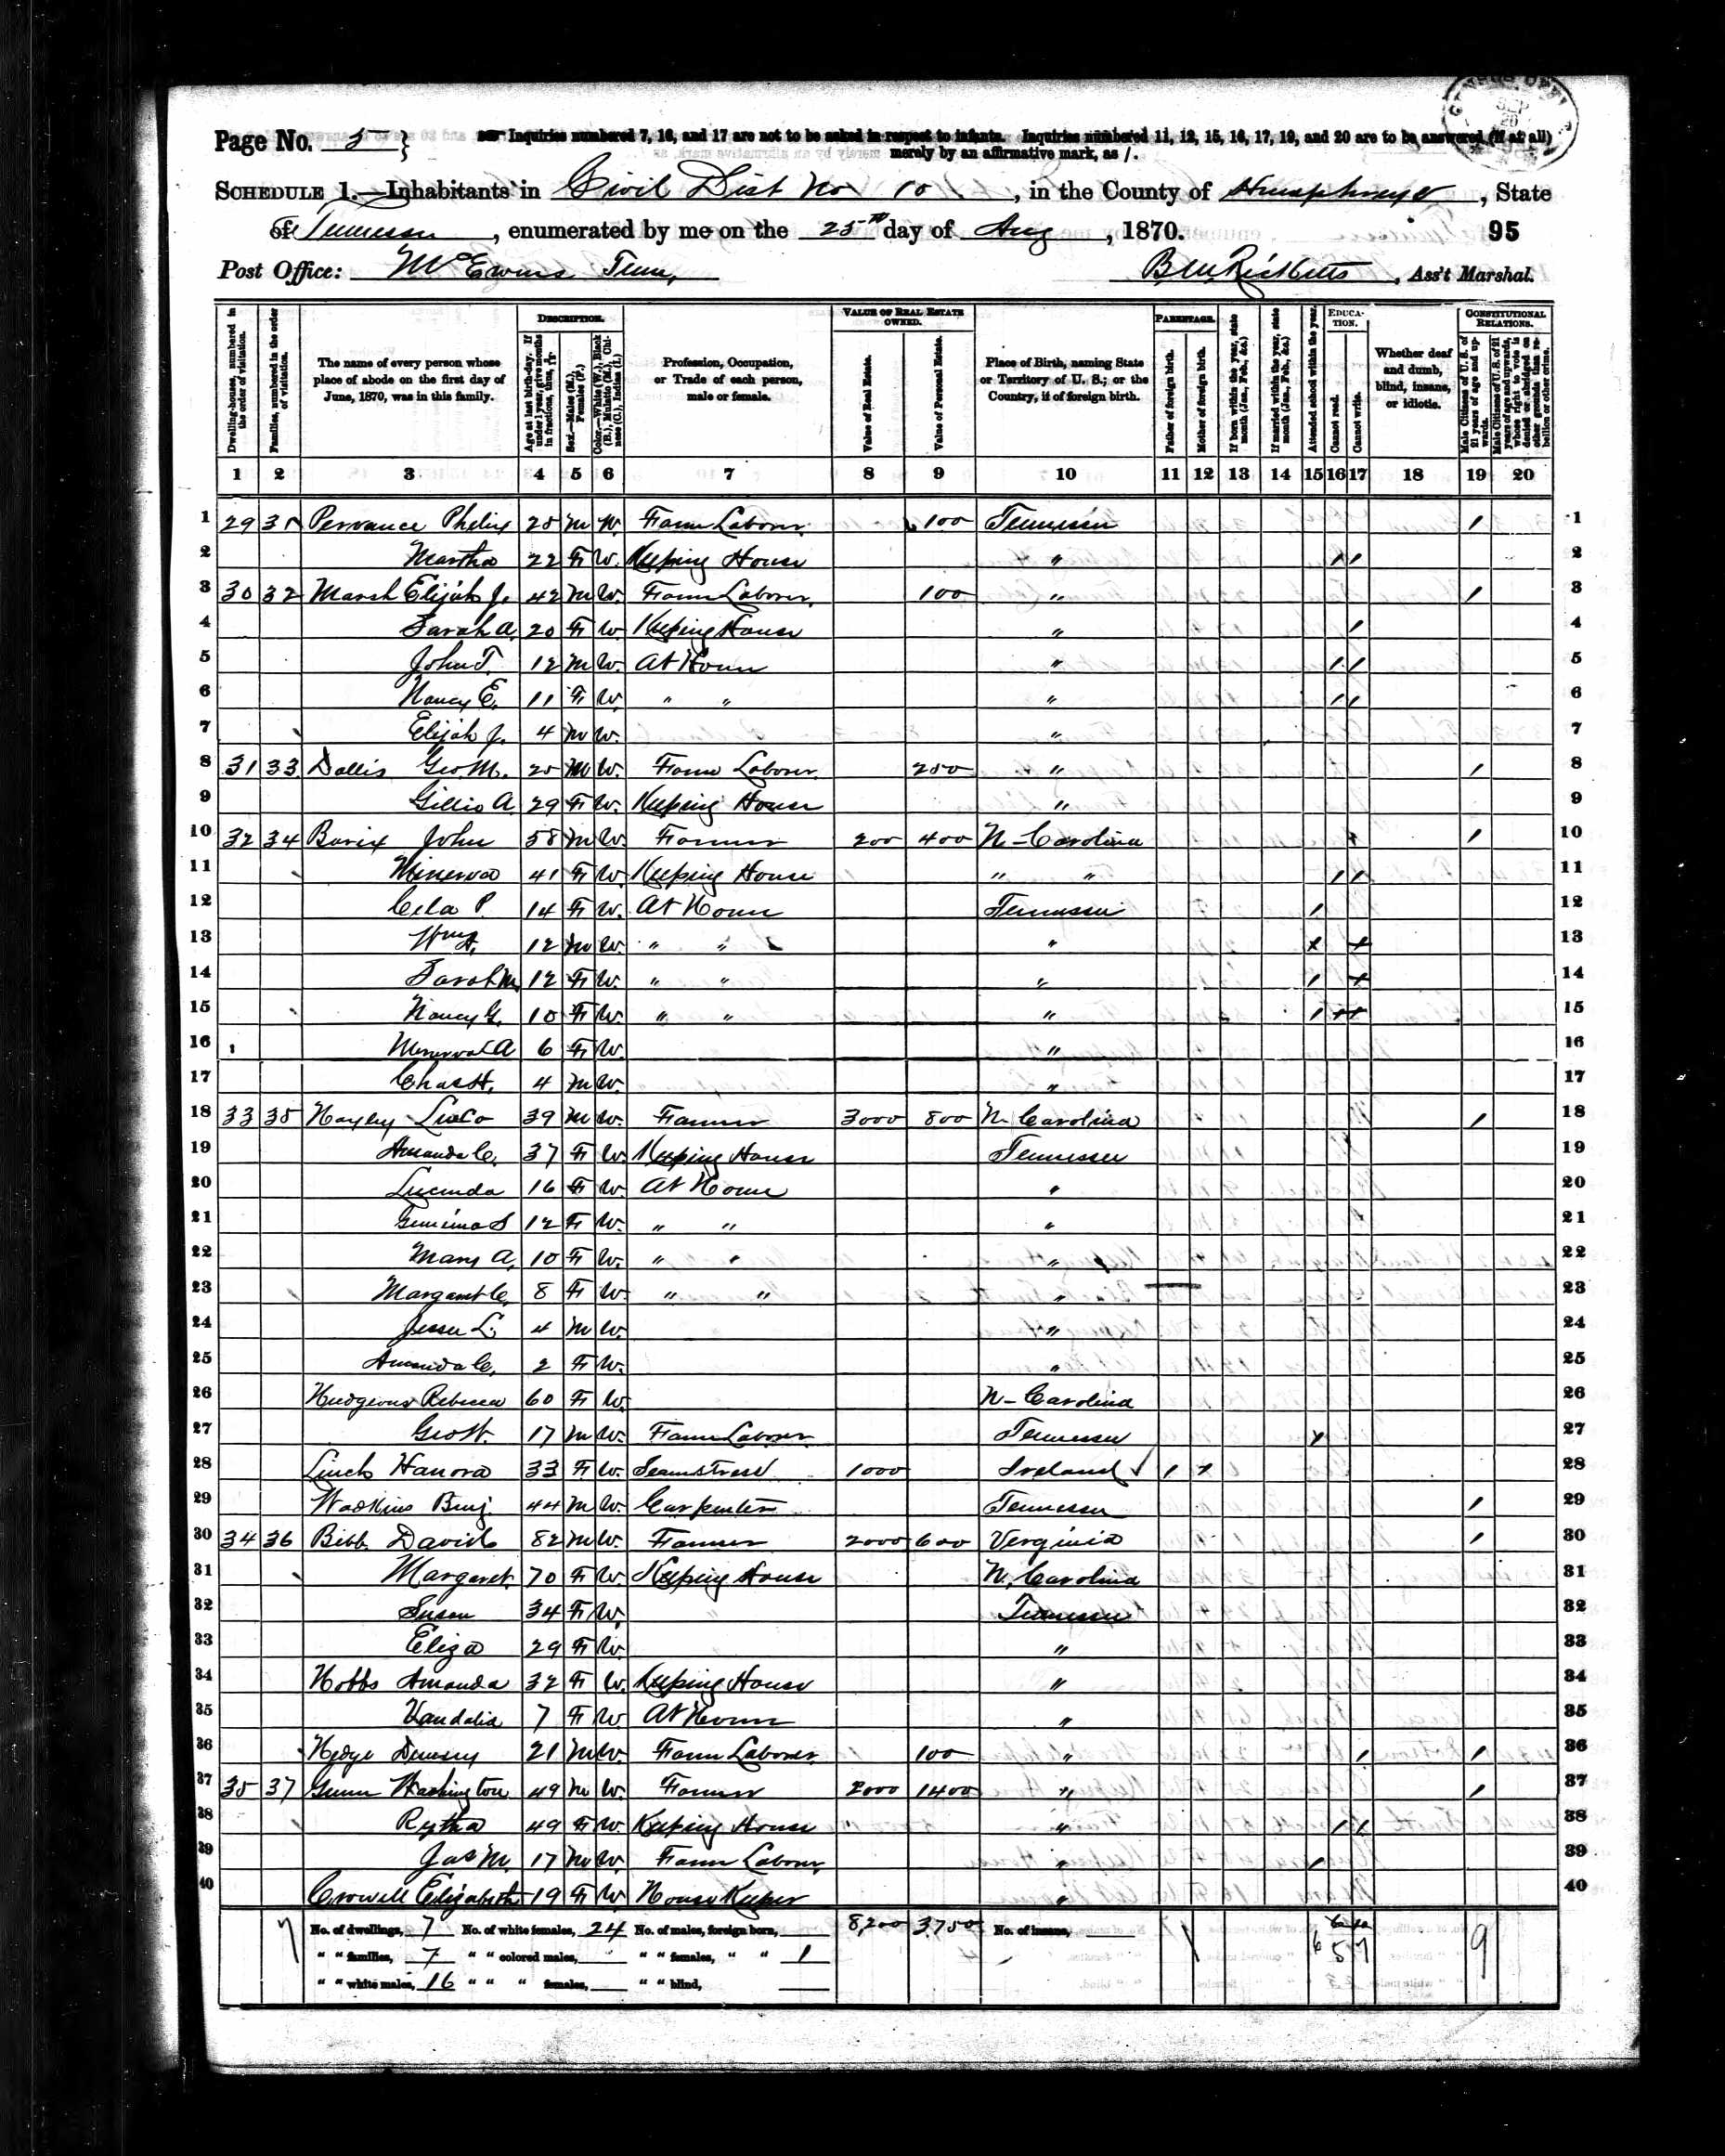 George W. Gunn and wife Retha Brazzell, 1870 Humphreys County, Tennessee, census